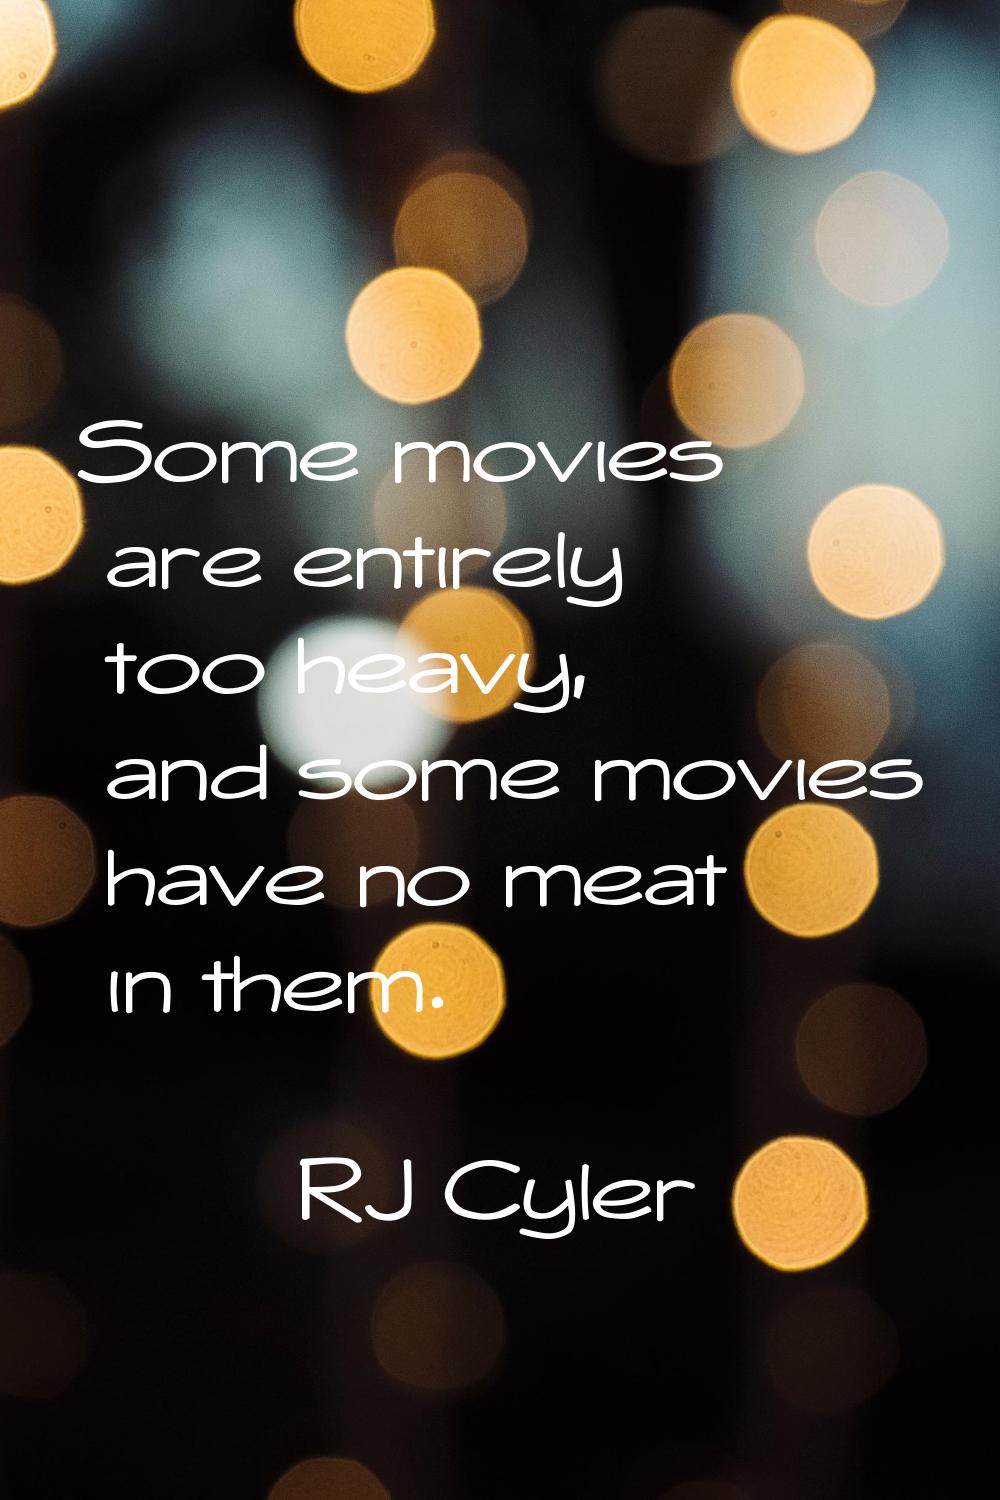 Some movies are entirely too heavy, and some movies have no meat in them.